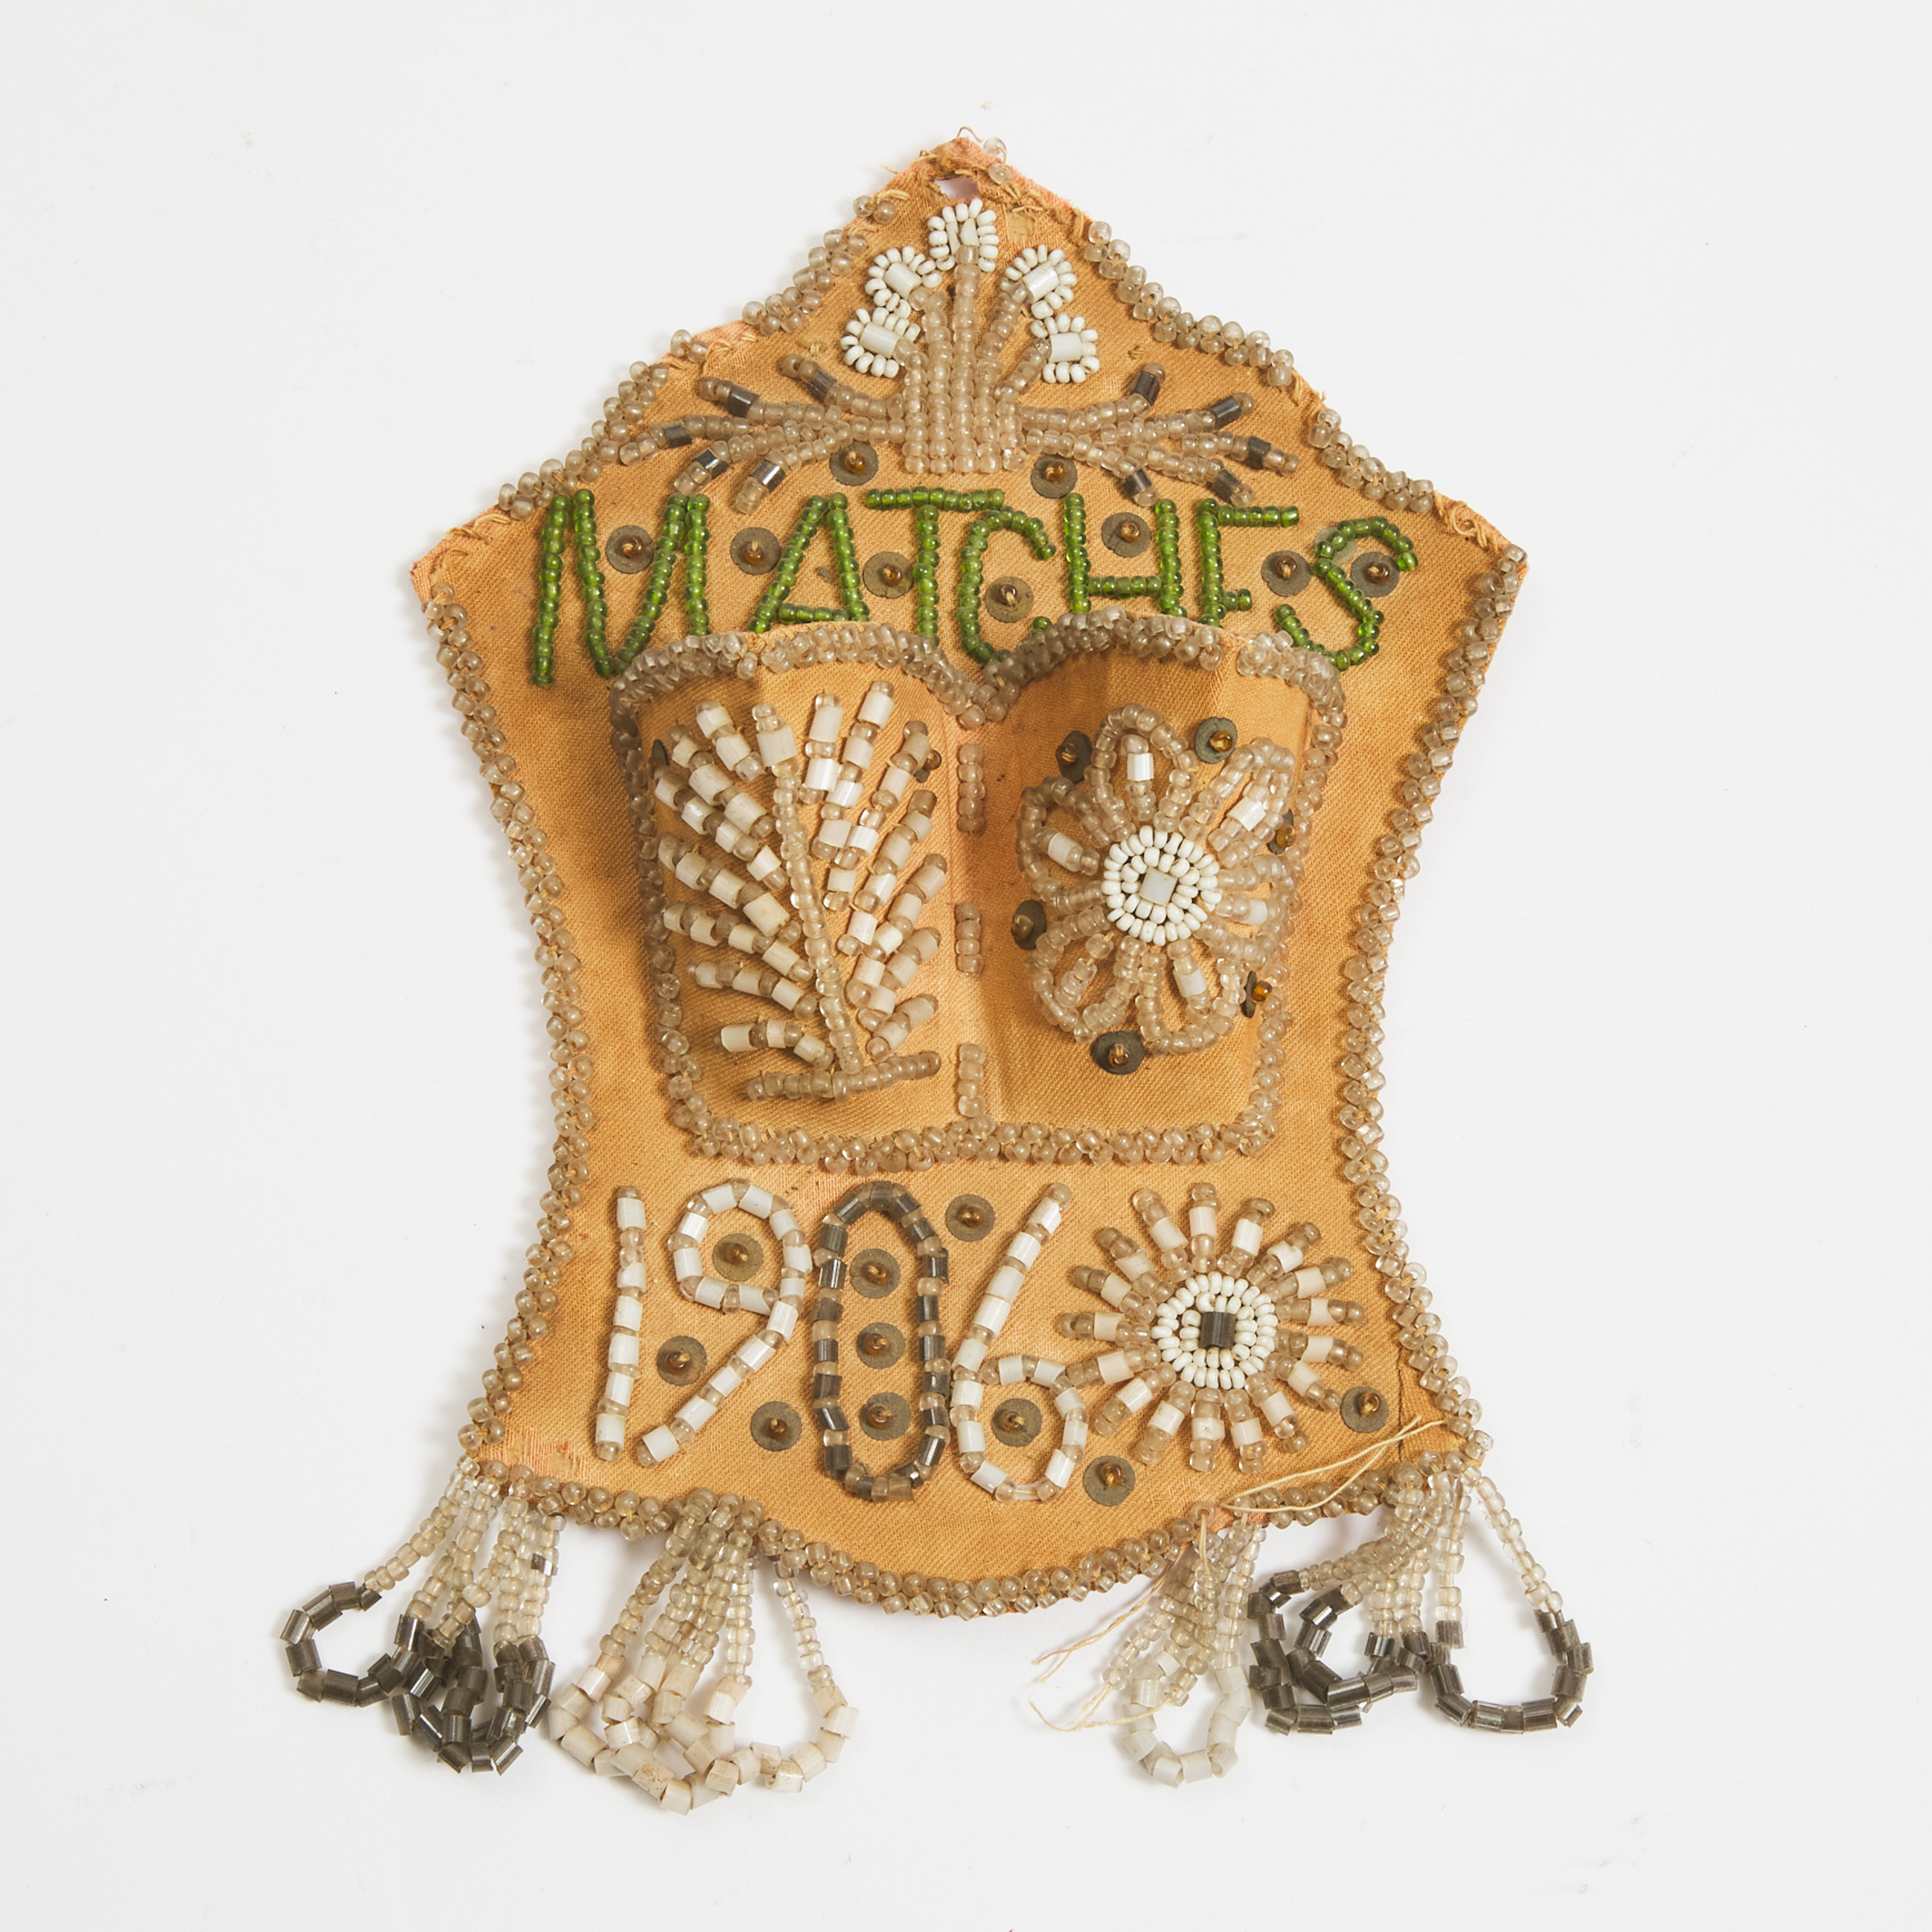 Iroquois Beaded Wall Mount Match Holder, Turtle Island, North American, dated 1906